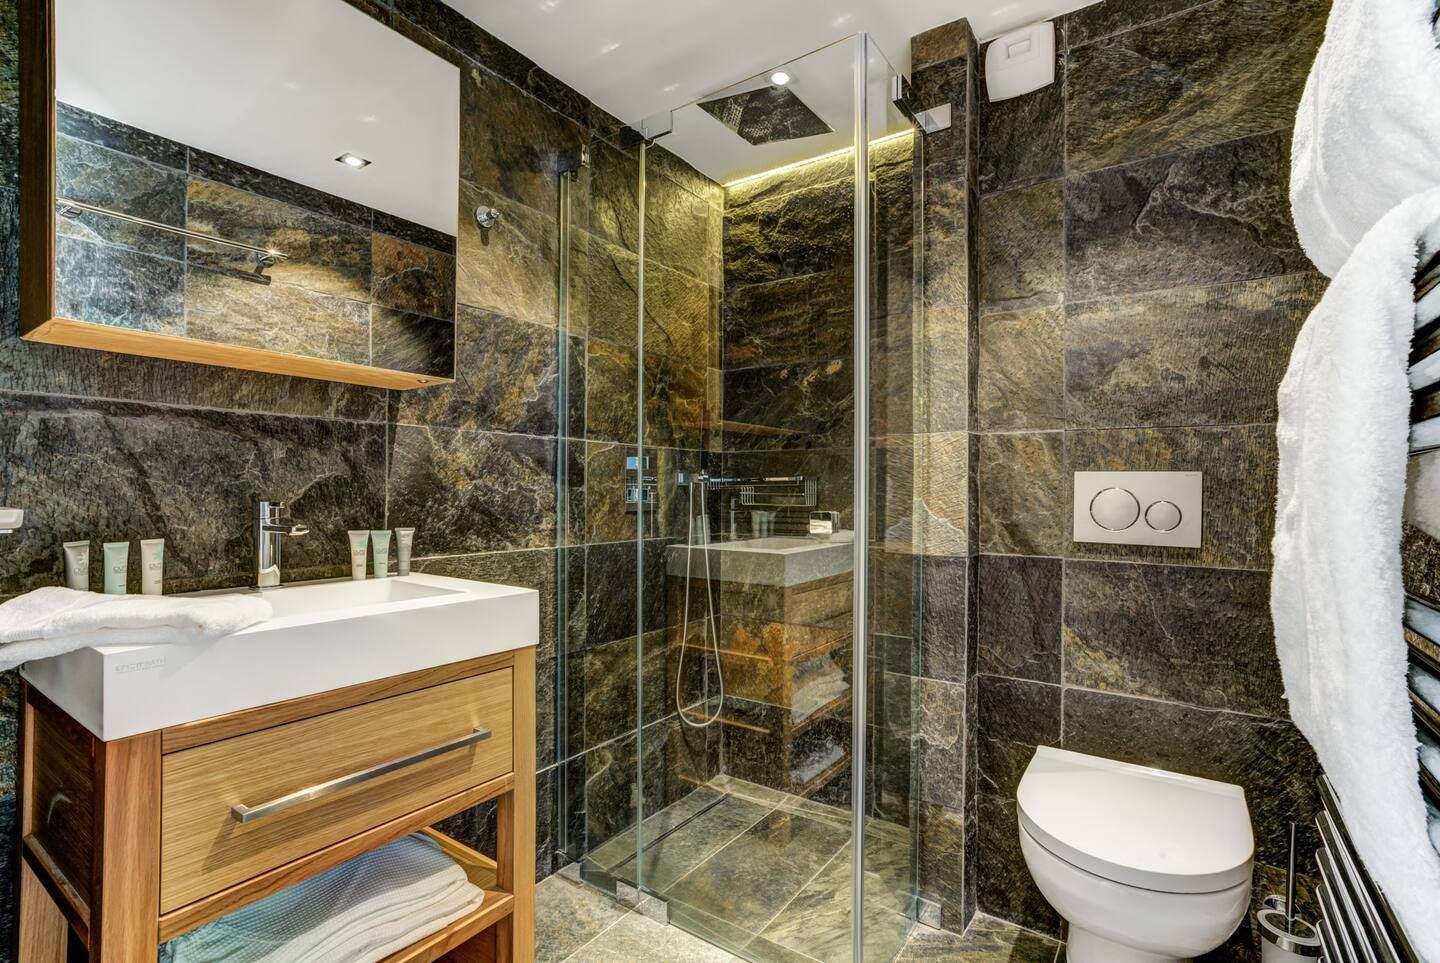 Picture of a vacation rental bathroom.